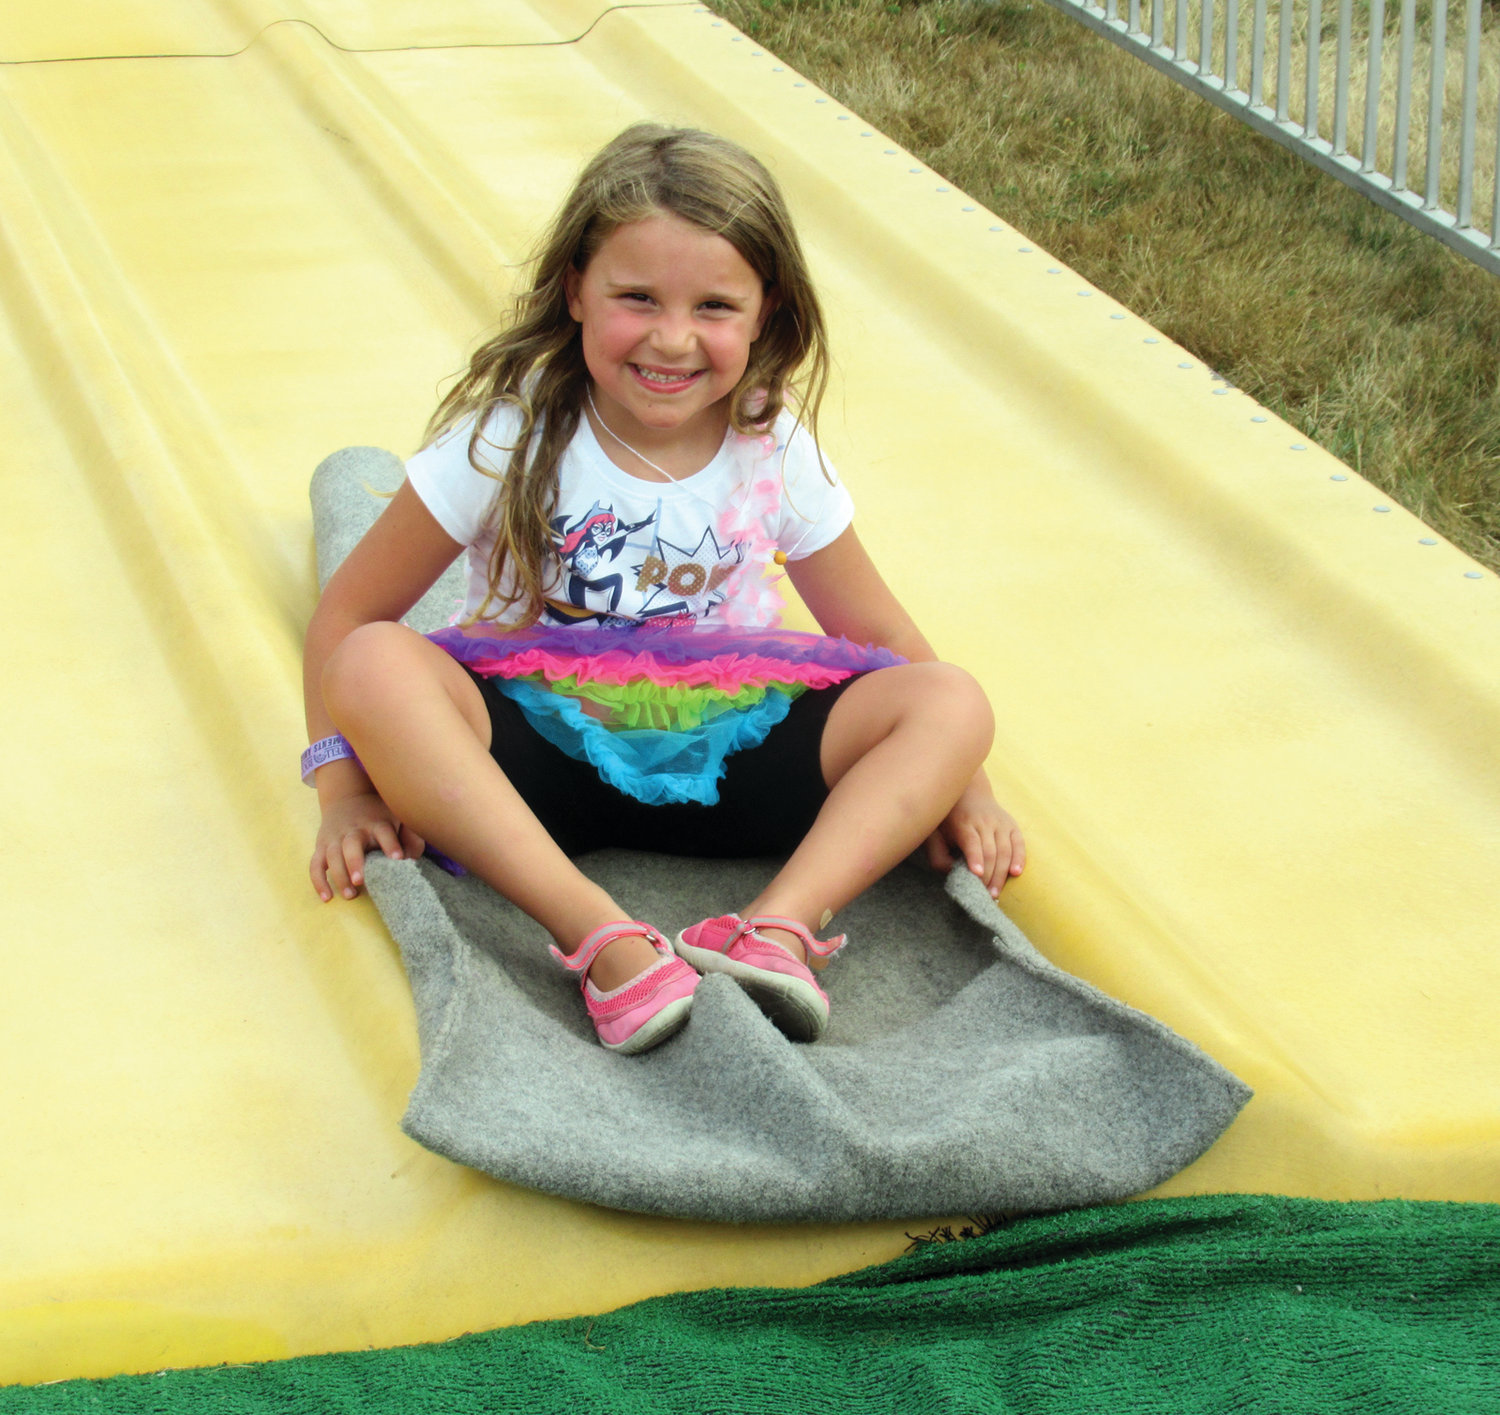 SMILING AND SLIDING: Alexandra Trikoulis is all smiles after finishing yet another run on the popular Rockwell Amusements Fun Slide.